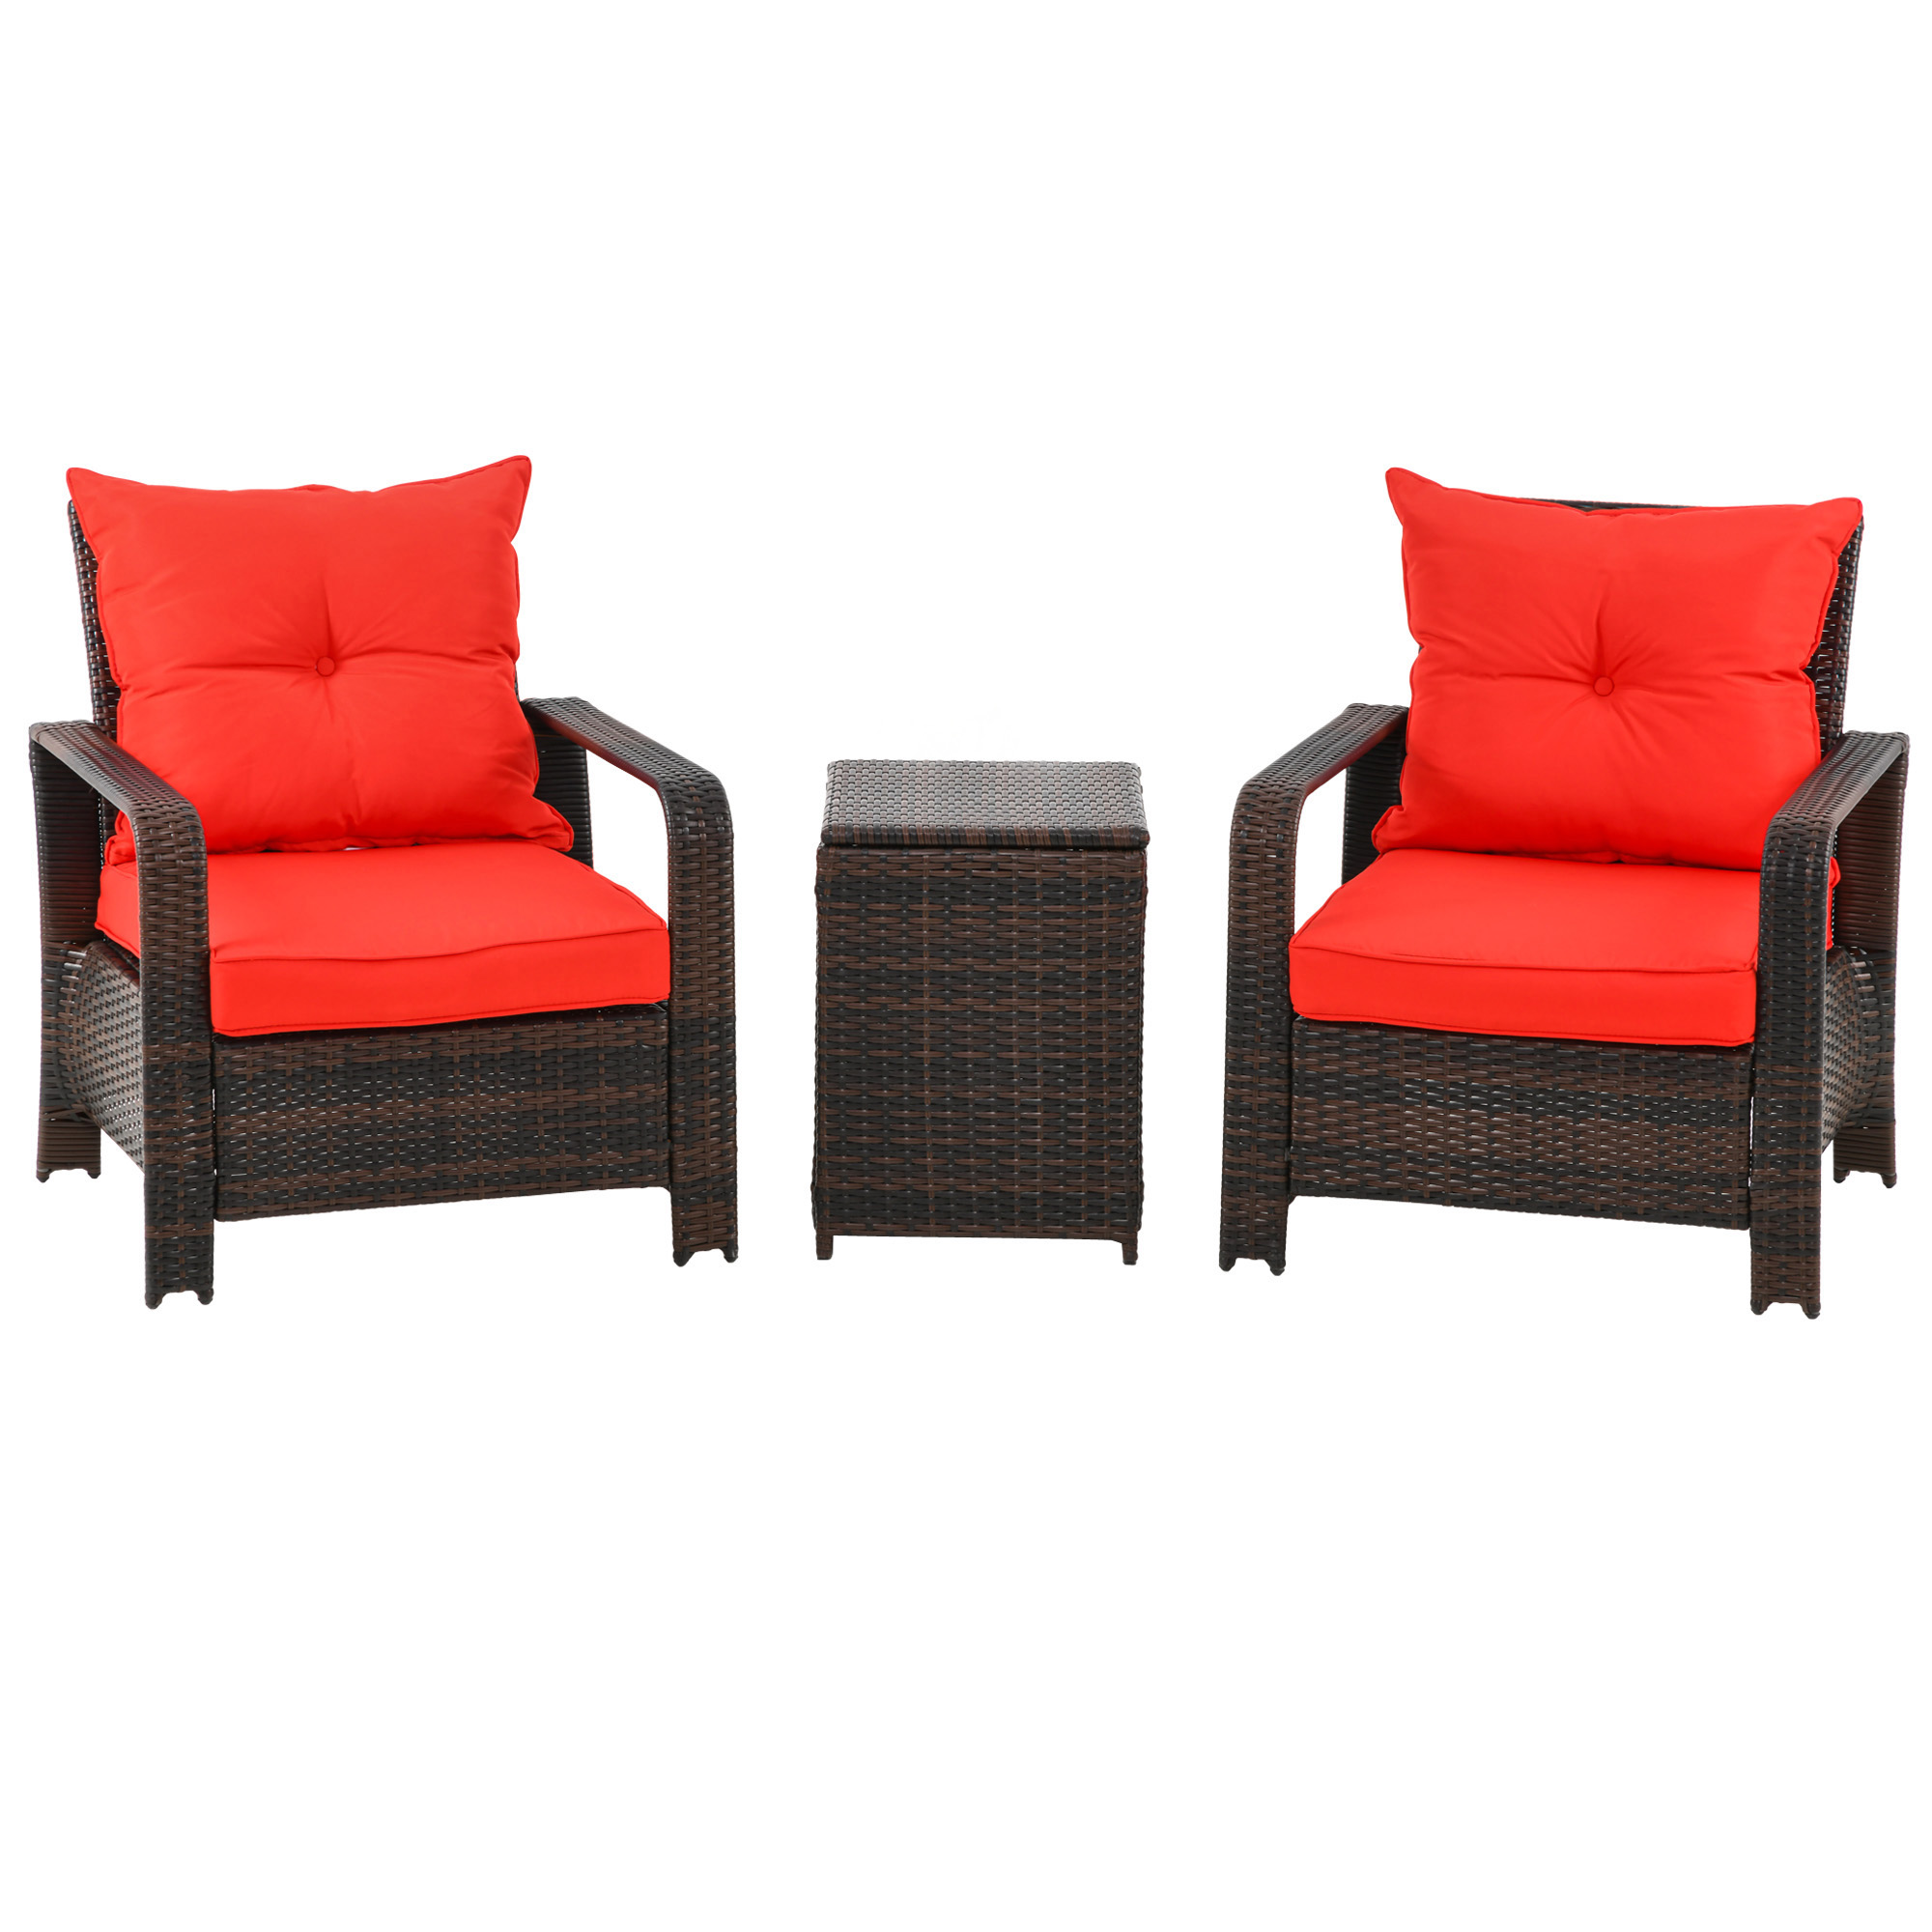 Outsunny 3 Piece Patio Furniture Set, PE Wicker Storage Table & Chairs, Red - image 1 of 9